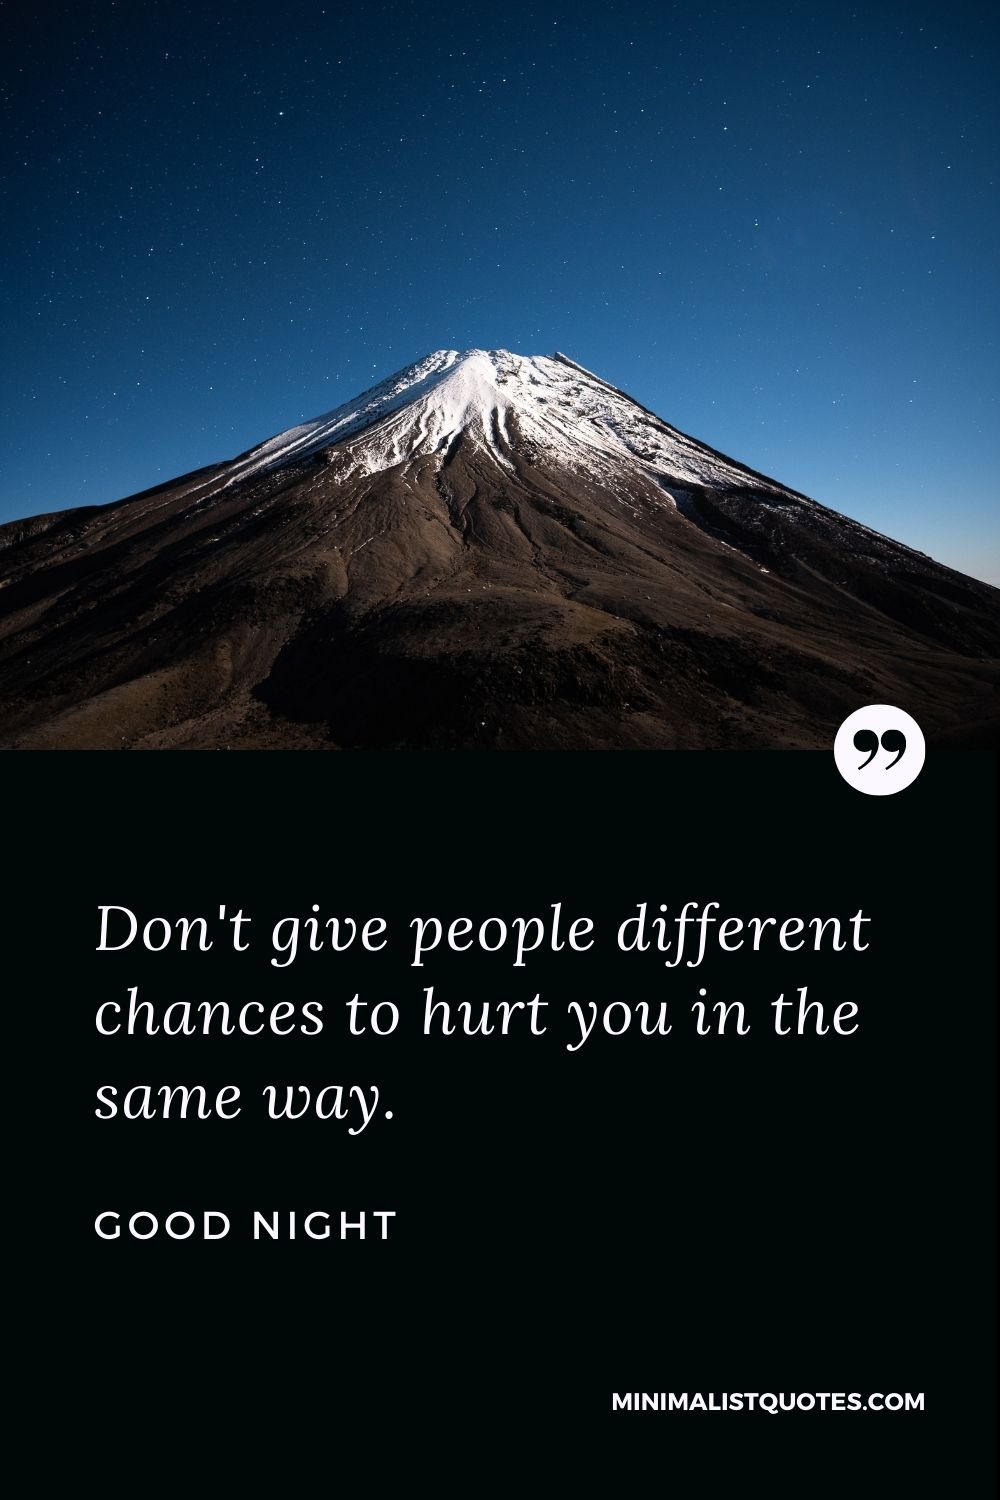 Good Night Wishes - Don't give people different chances to hurt you in the same way.